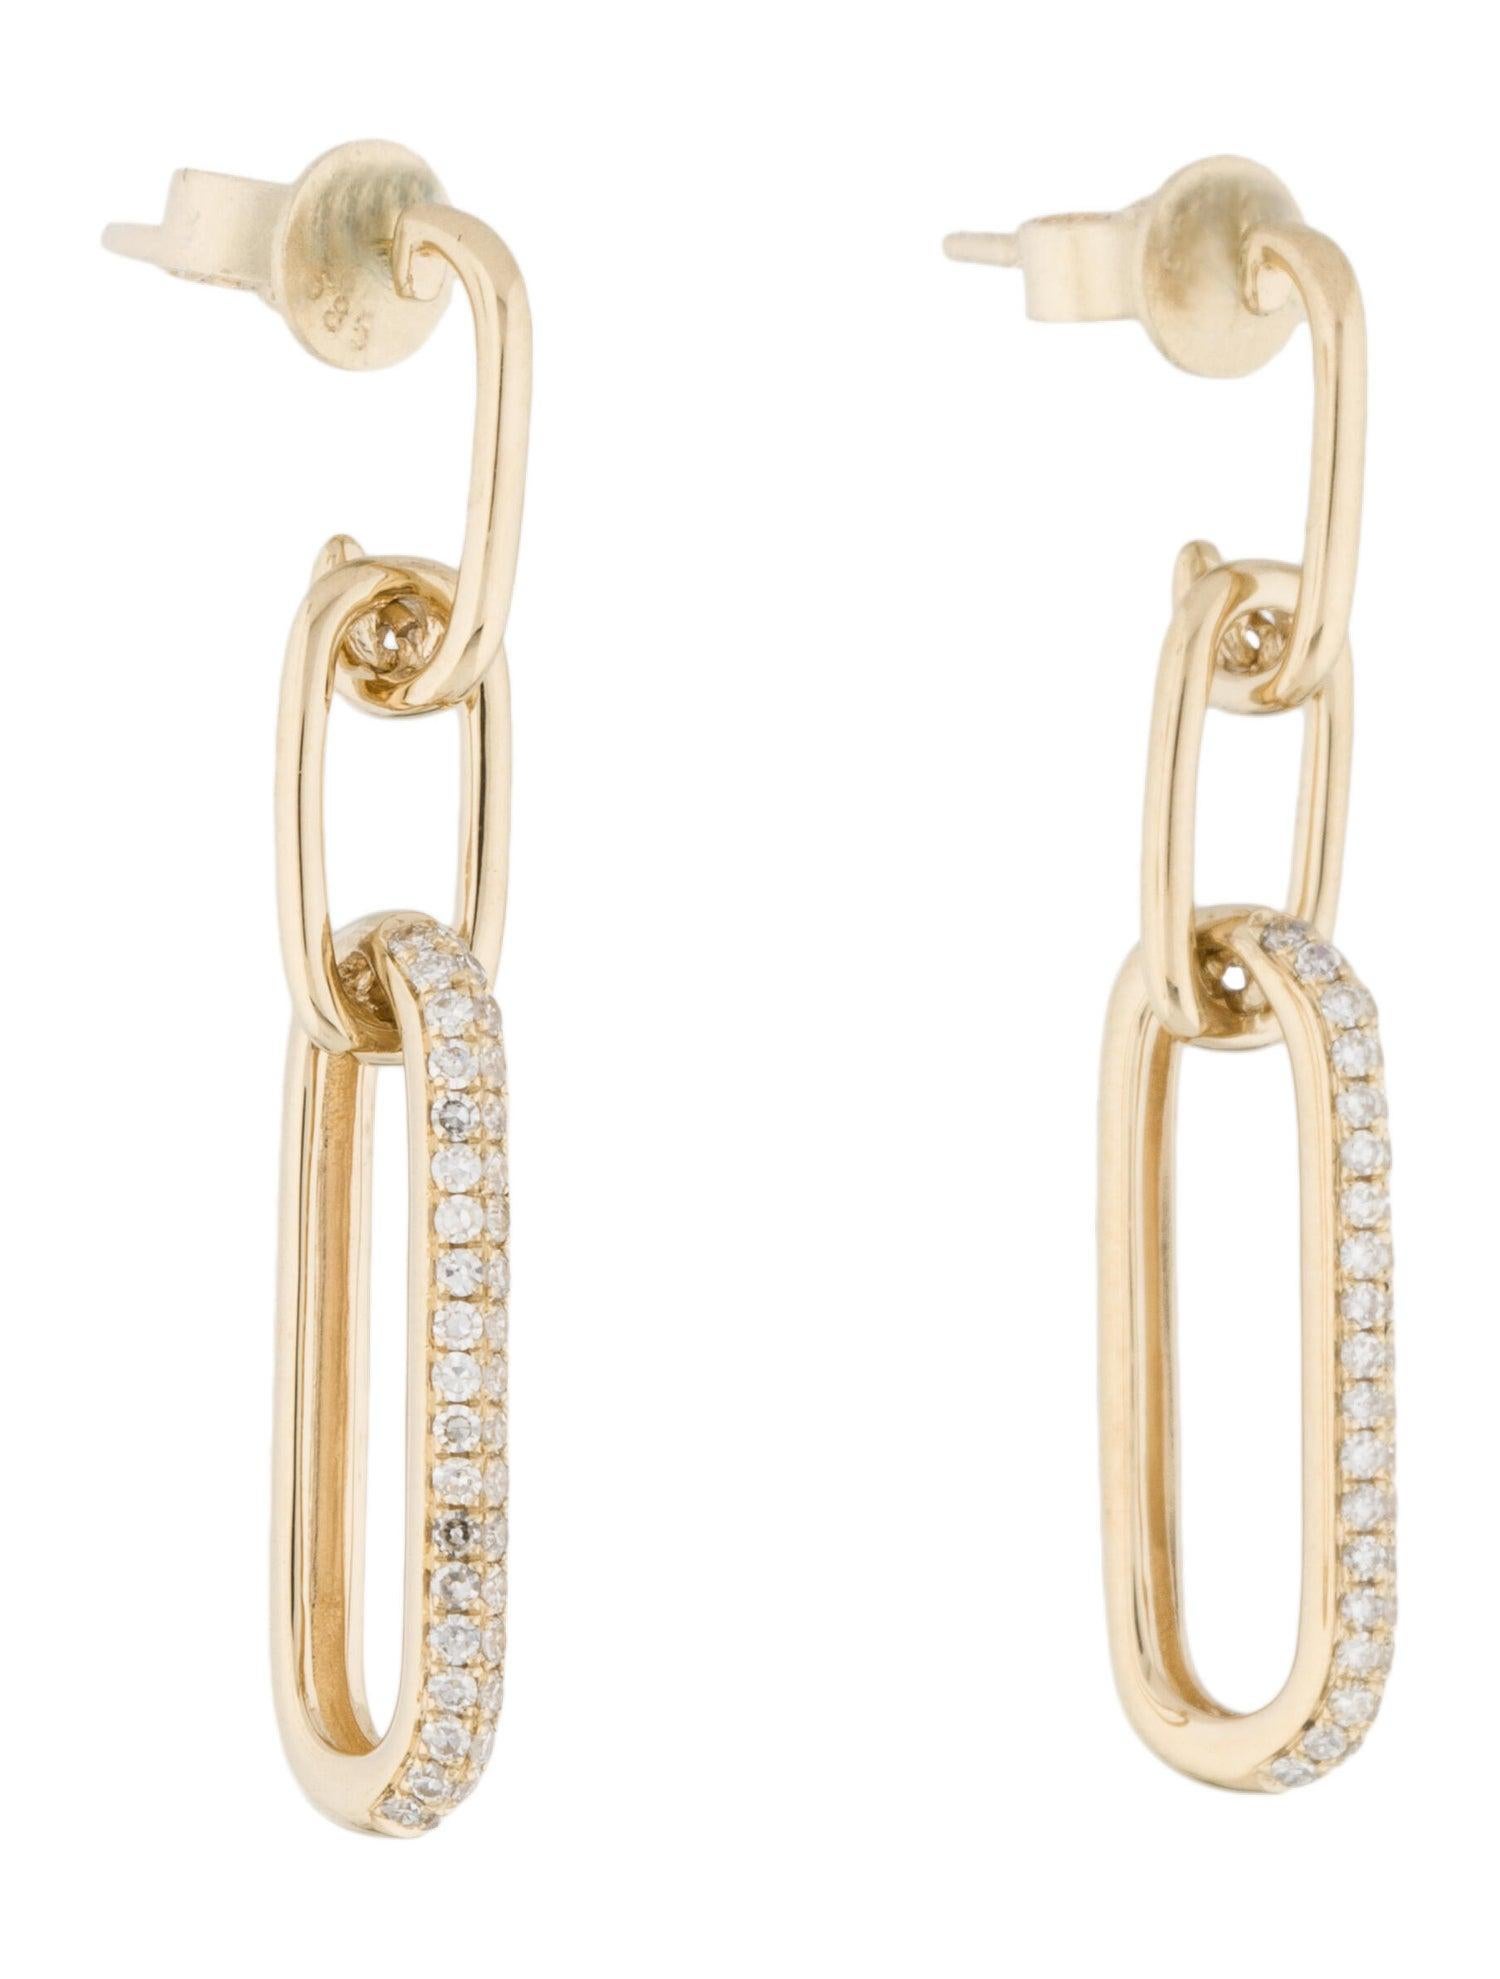 These Trendy and appealing 14k gold and Diamond Dangle Link Earrings are a must-have! They make the best addition to your jewelry collection! Featuring approximately 0.33 ct. of Diamonds.  Latch-back closure. Available in white, yellow & rose gold. 